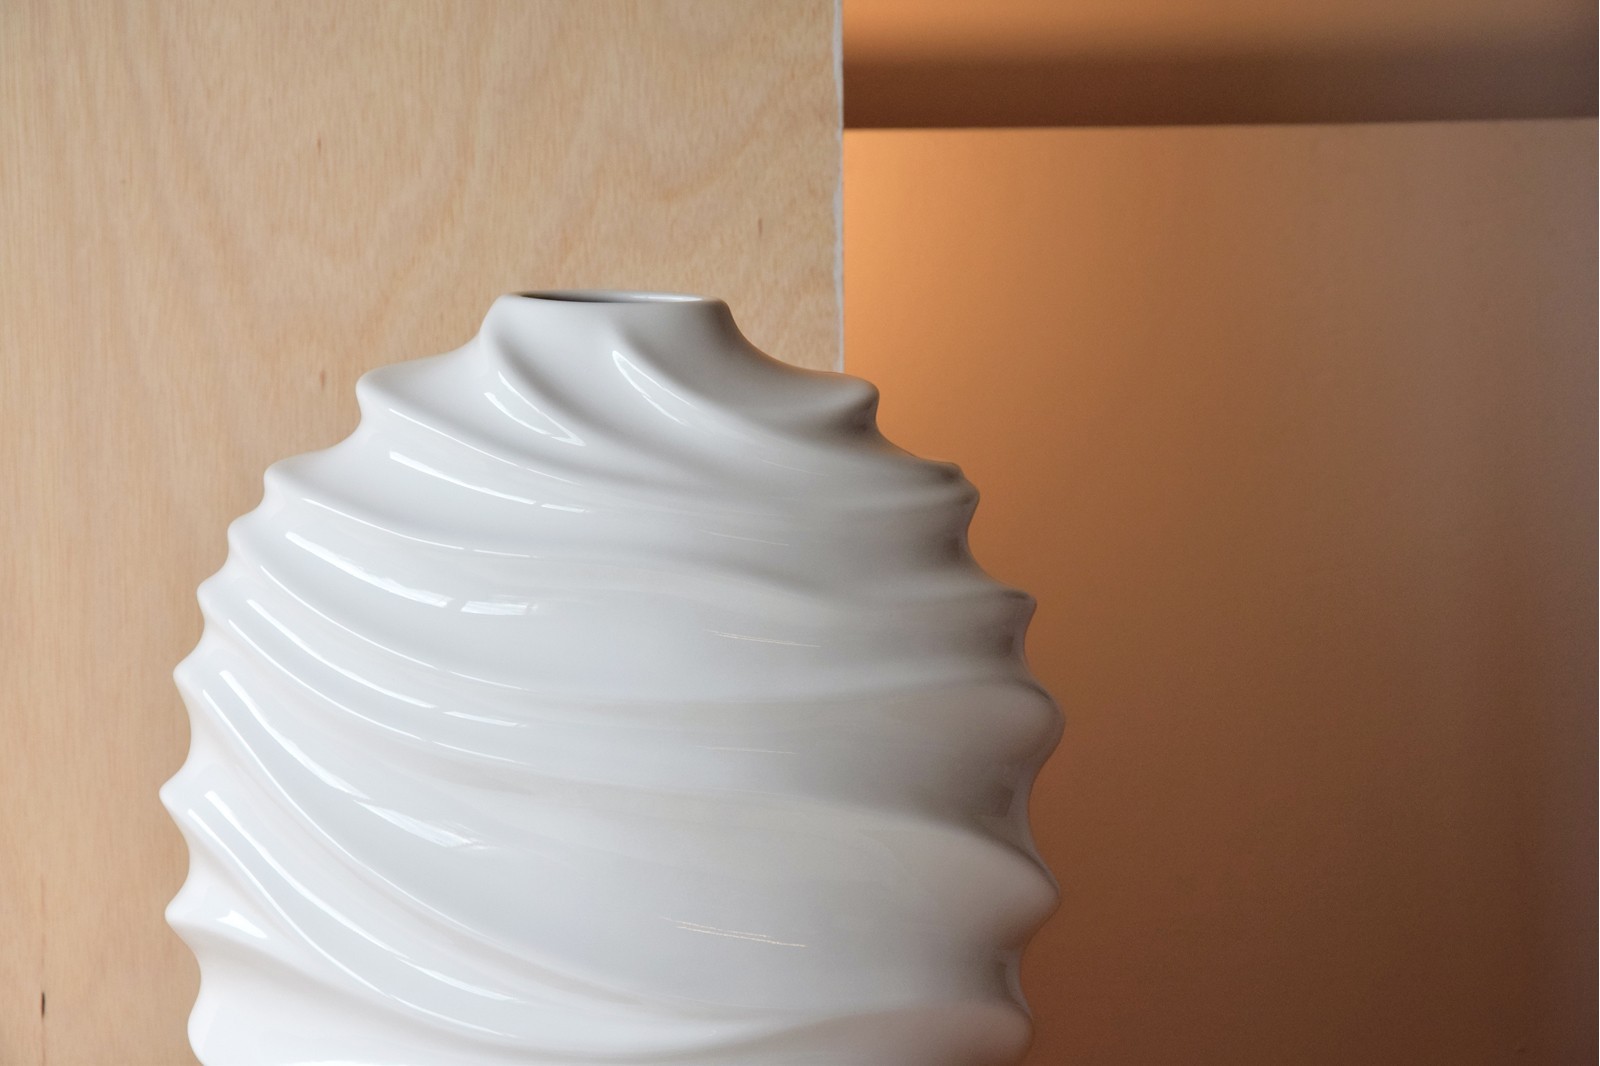 WAVES COLLECTION: CERAMIC VASES AND CENTREPIECE